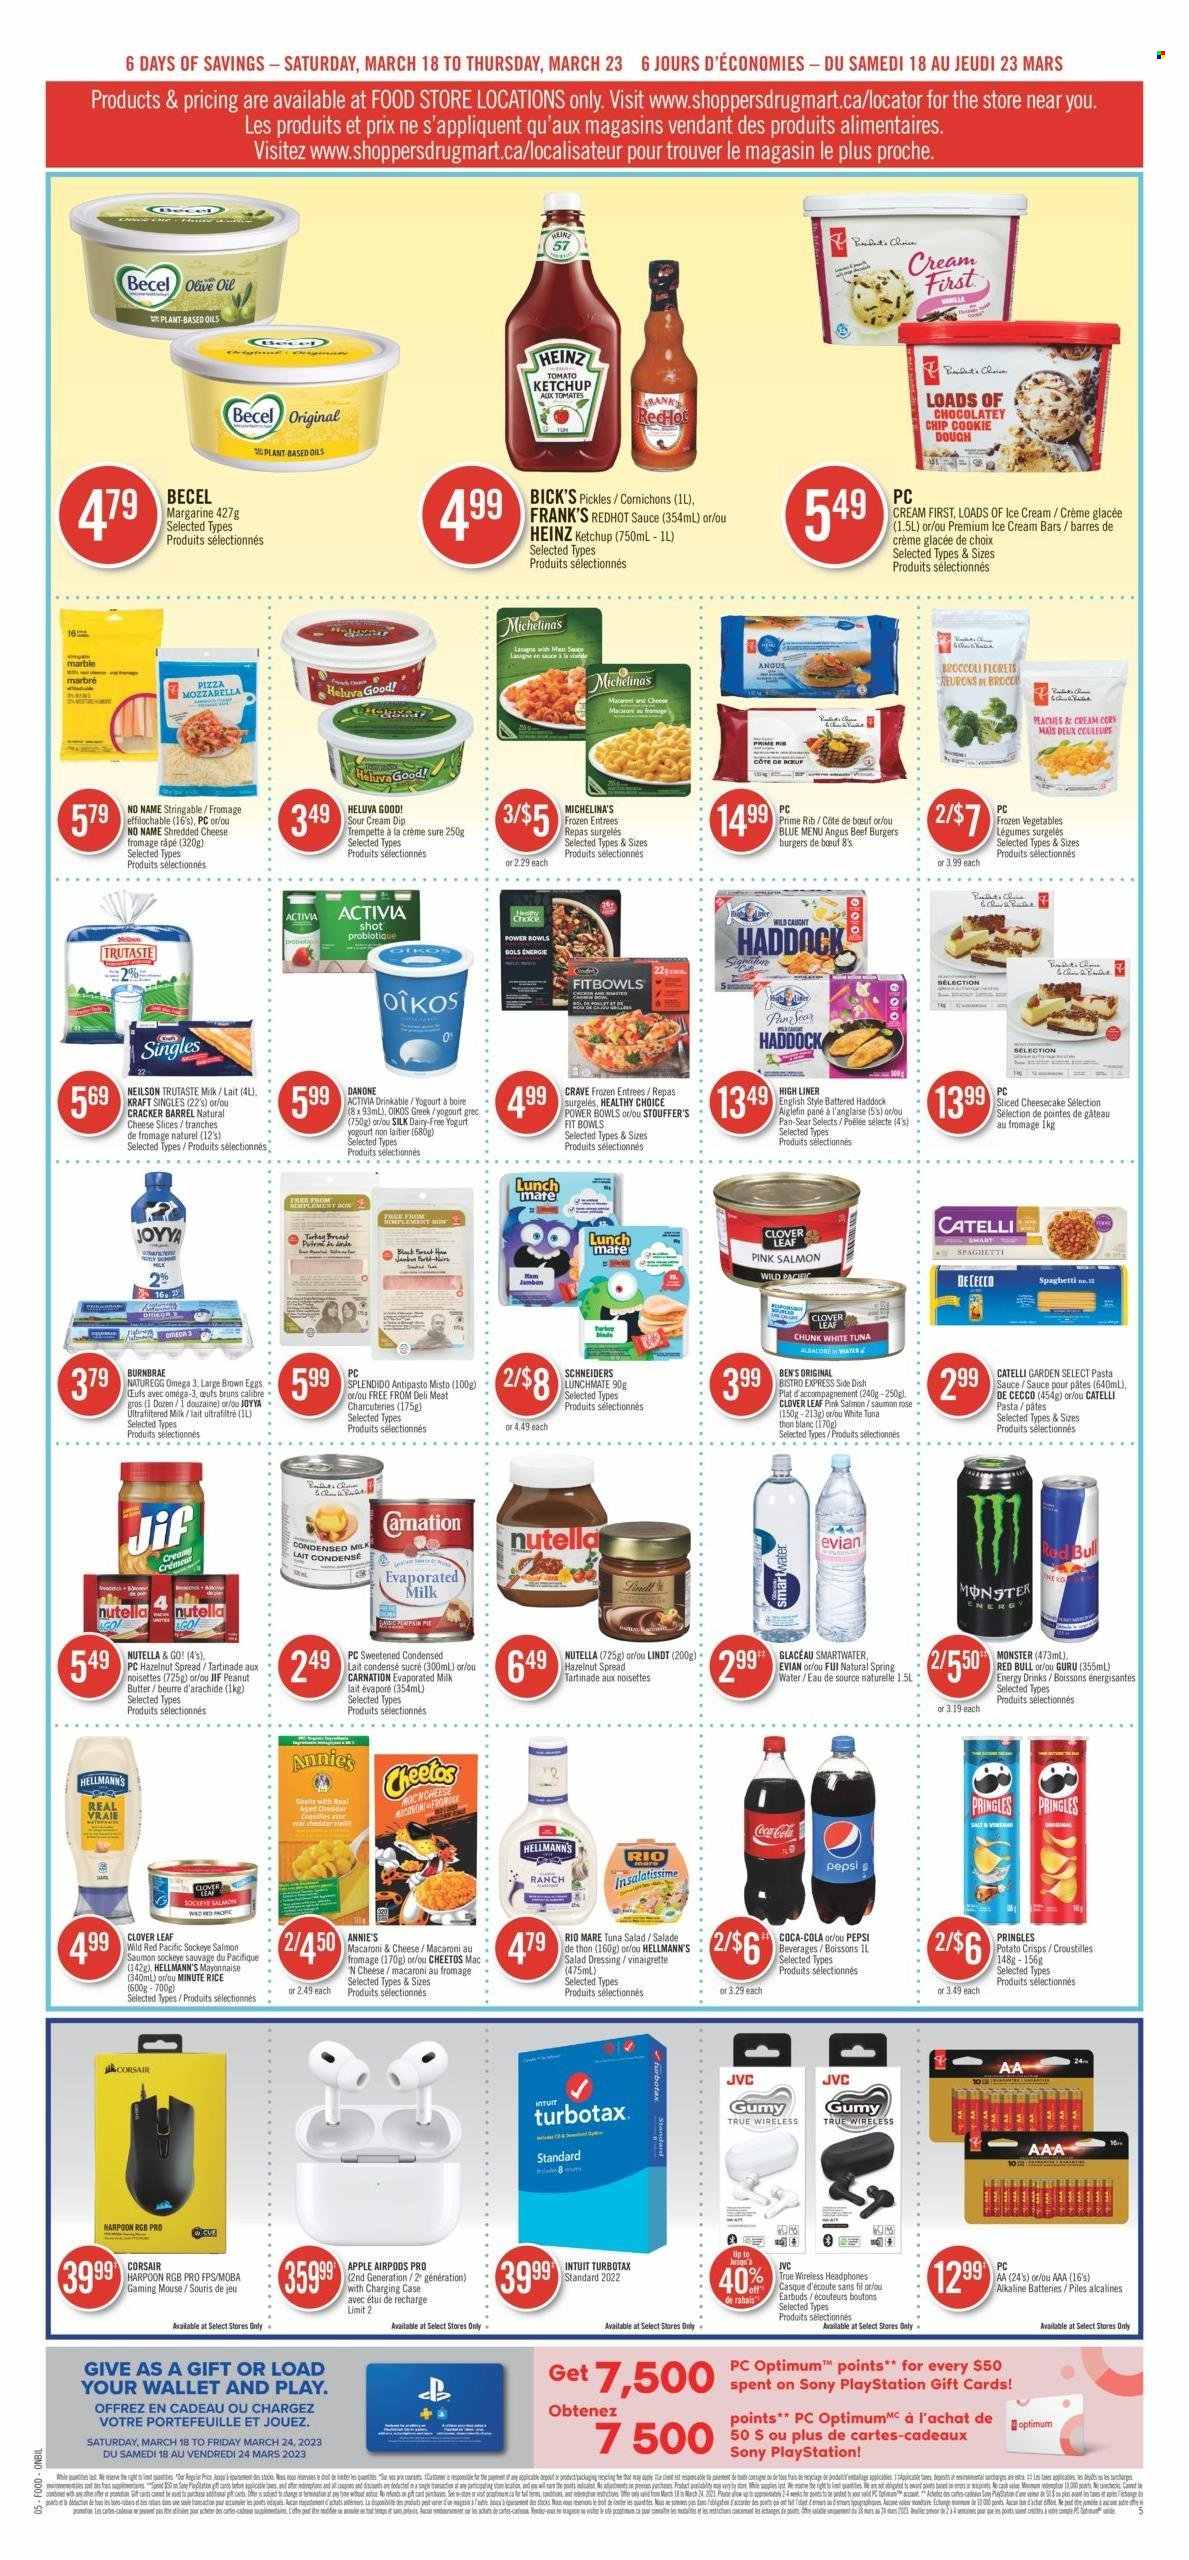 thumbnail - Shoppers Drug Mart Flyer - March 18, 2023 - March 23, 2023 - Sales products - gaming mouse, Sony, Apple, scale, pie, salmon, tuna, haddock, No Name, macaroni & cheese, spaghetti, pasta sauce, hamburger, sauce, beef burger, Healthy Choice, Annie's, Kraft®, sandwich slices, shredded cheese, sliced cheese, Kraft Singles, yoghurt, Clover, Activia, Oikos, evaporated milk, Silk, eggs, margarine, sour cream, mayonnaise, dip, Hellmann’s, ice cream, ice cream bars, Stouffer's, Mars, crackers, potato crisps, Pringles, Cheetos, pickles, tuna salad, rice, salad dressing, vinaigrette dressing, dressing, olive oil, peanut butter, hazelnut spread, Jif, Coca-Cola, Pepsi, energy drink, Monster, Red Bull, spring water, Smartwater, Evian, water, Sure, pot, pan, battery, alkaline batteries, Optimum, Corsair, mouse, PlayStation, PS, JVC, wireless headphones, headphones, Airpods, earbuds, Apple AirPods Pro, Omega-3, Go!, Heinz, ketchup, Nutella, Danone, Lindt. Page 4.